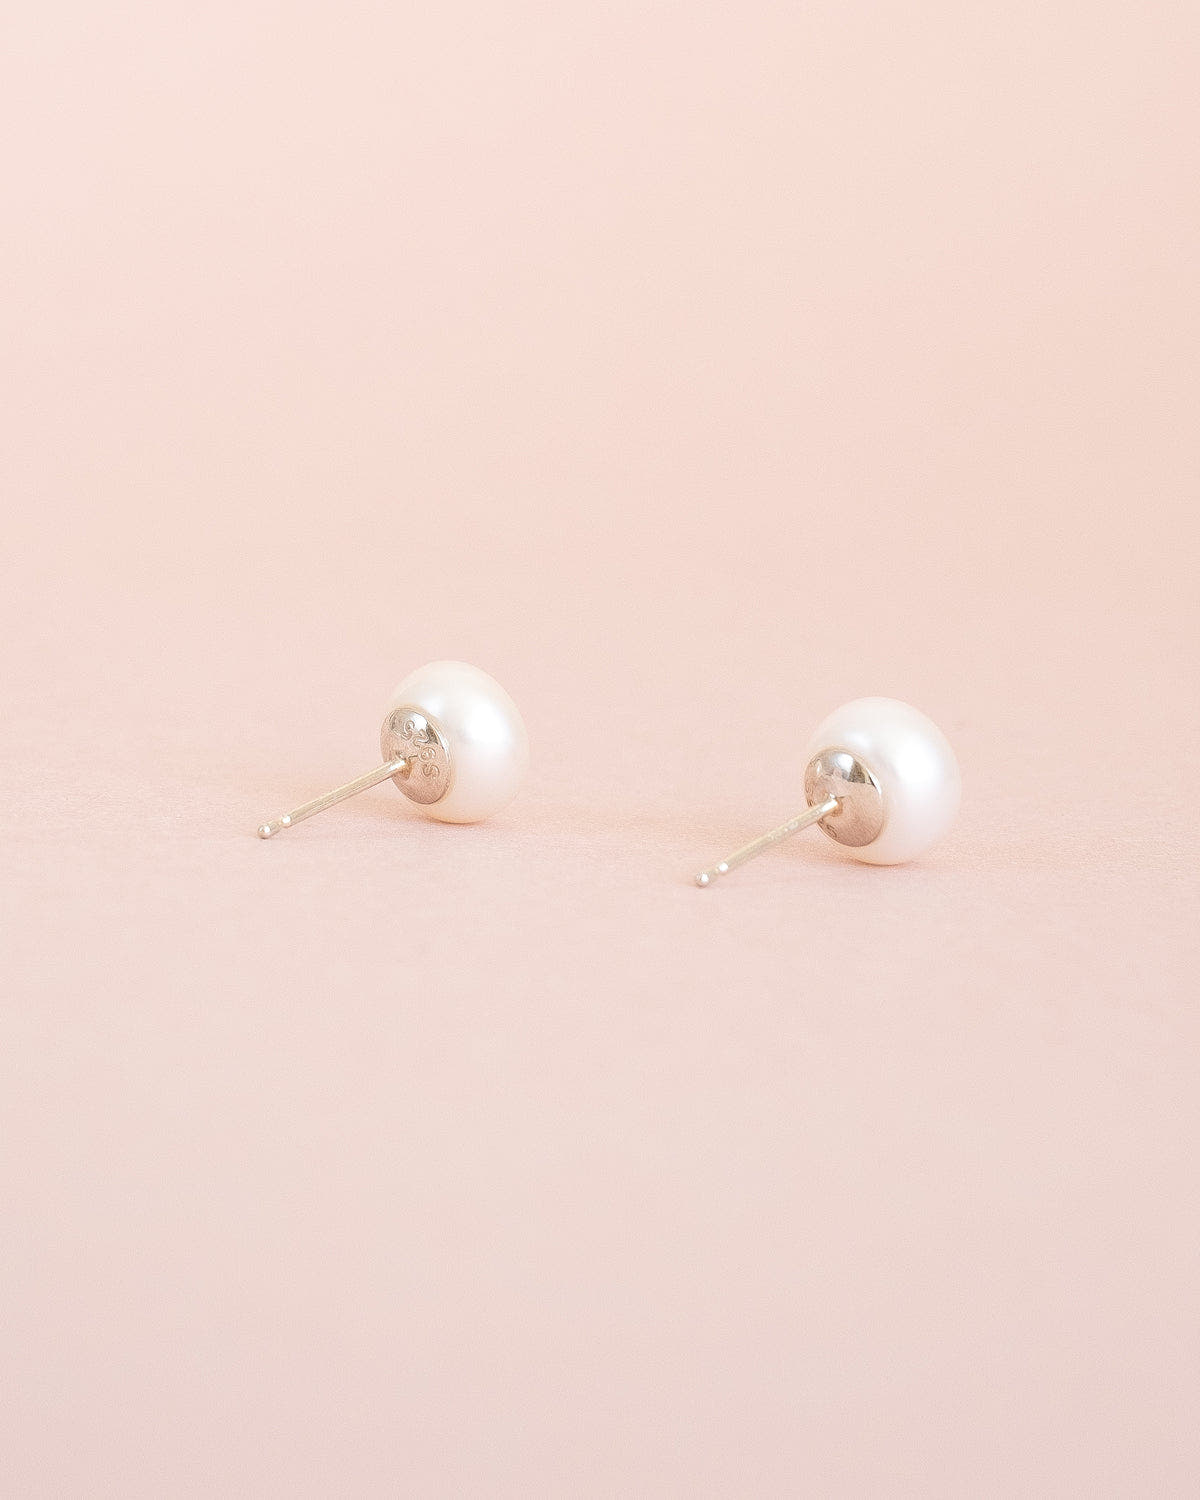 Real pearl stud earrings with silver posts, Christmas gift for her